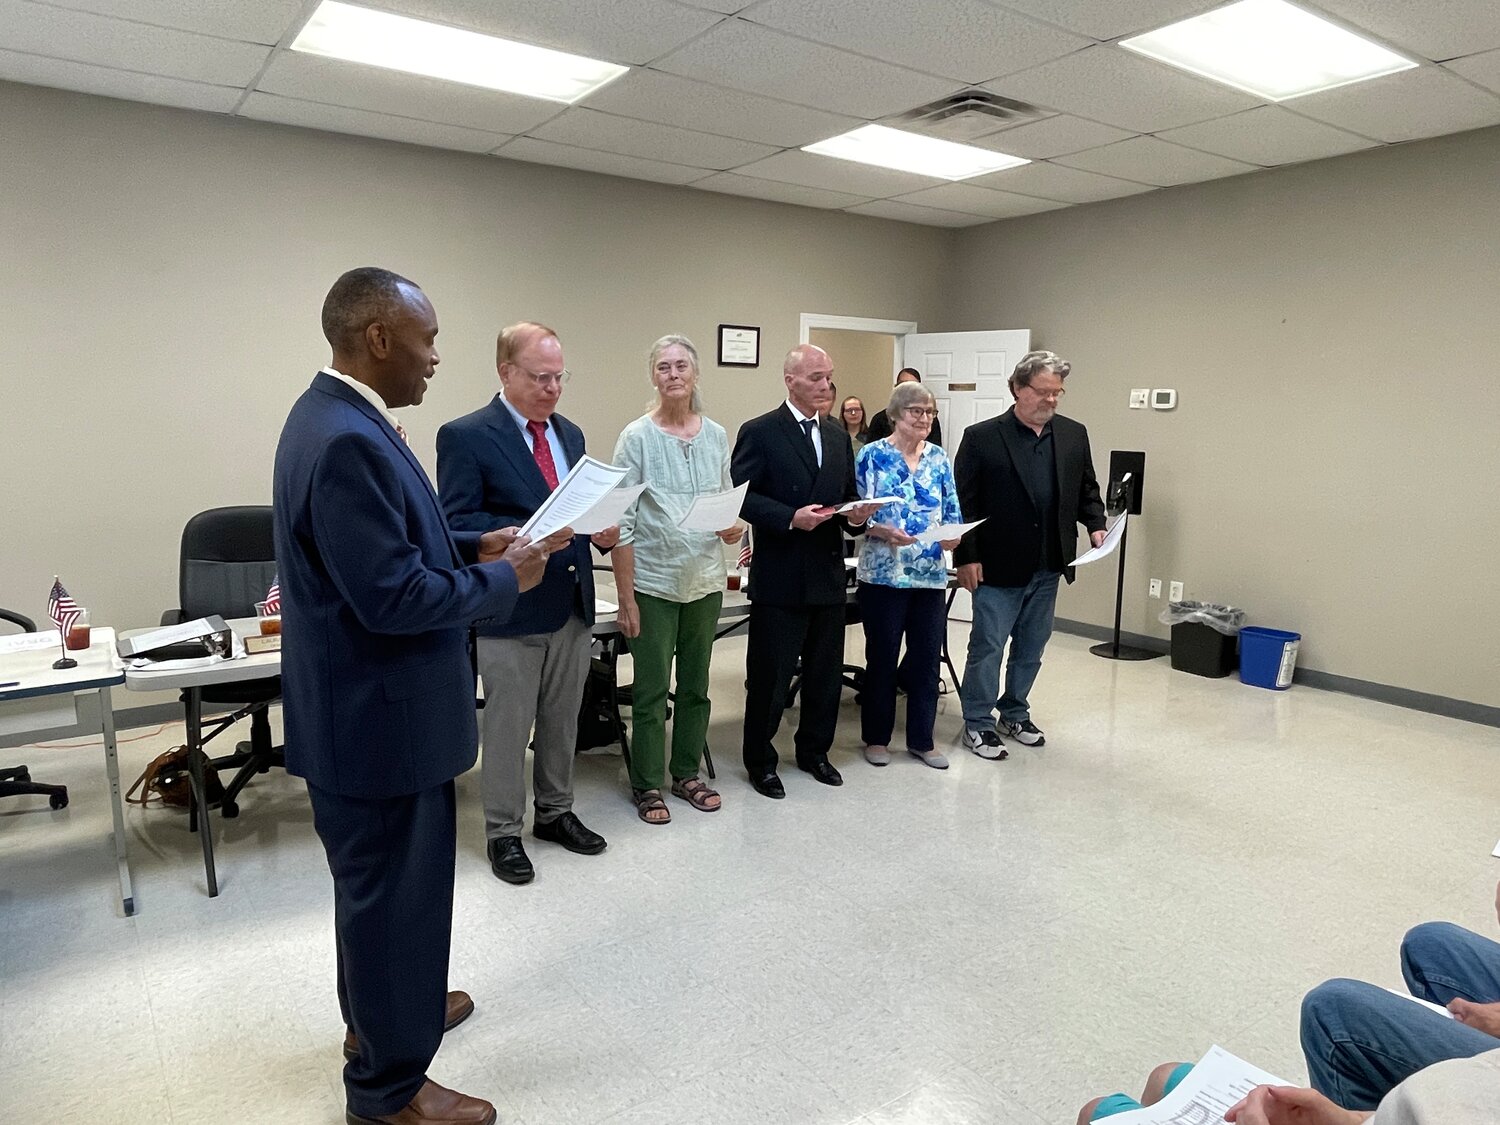 From left to right, N.C. House Rep. Robert Reives II (D-Dist.54) swore in Bob Tyson, Chair Laura Heise, Secretary Frank Dunphy, Erika Lindemann and Mark Barroso to the Chatham County Board of Elections at noon on Tuesday, July 18.